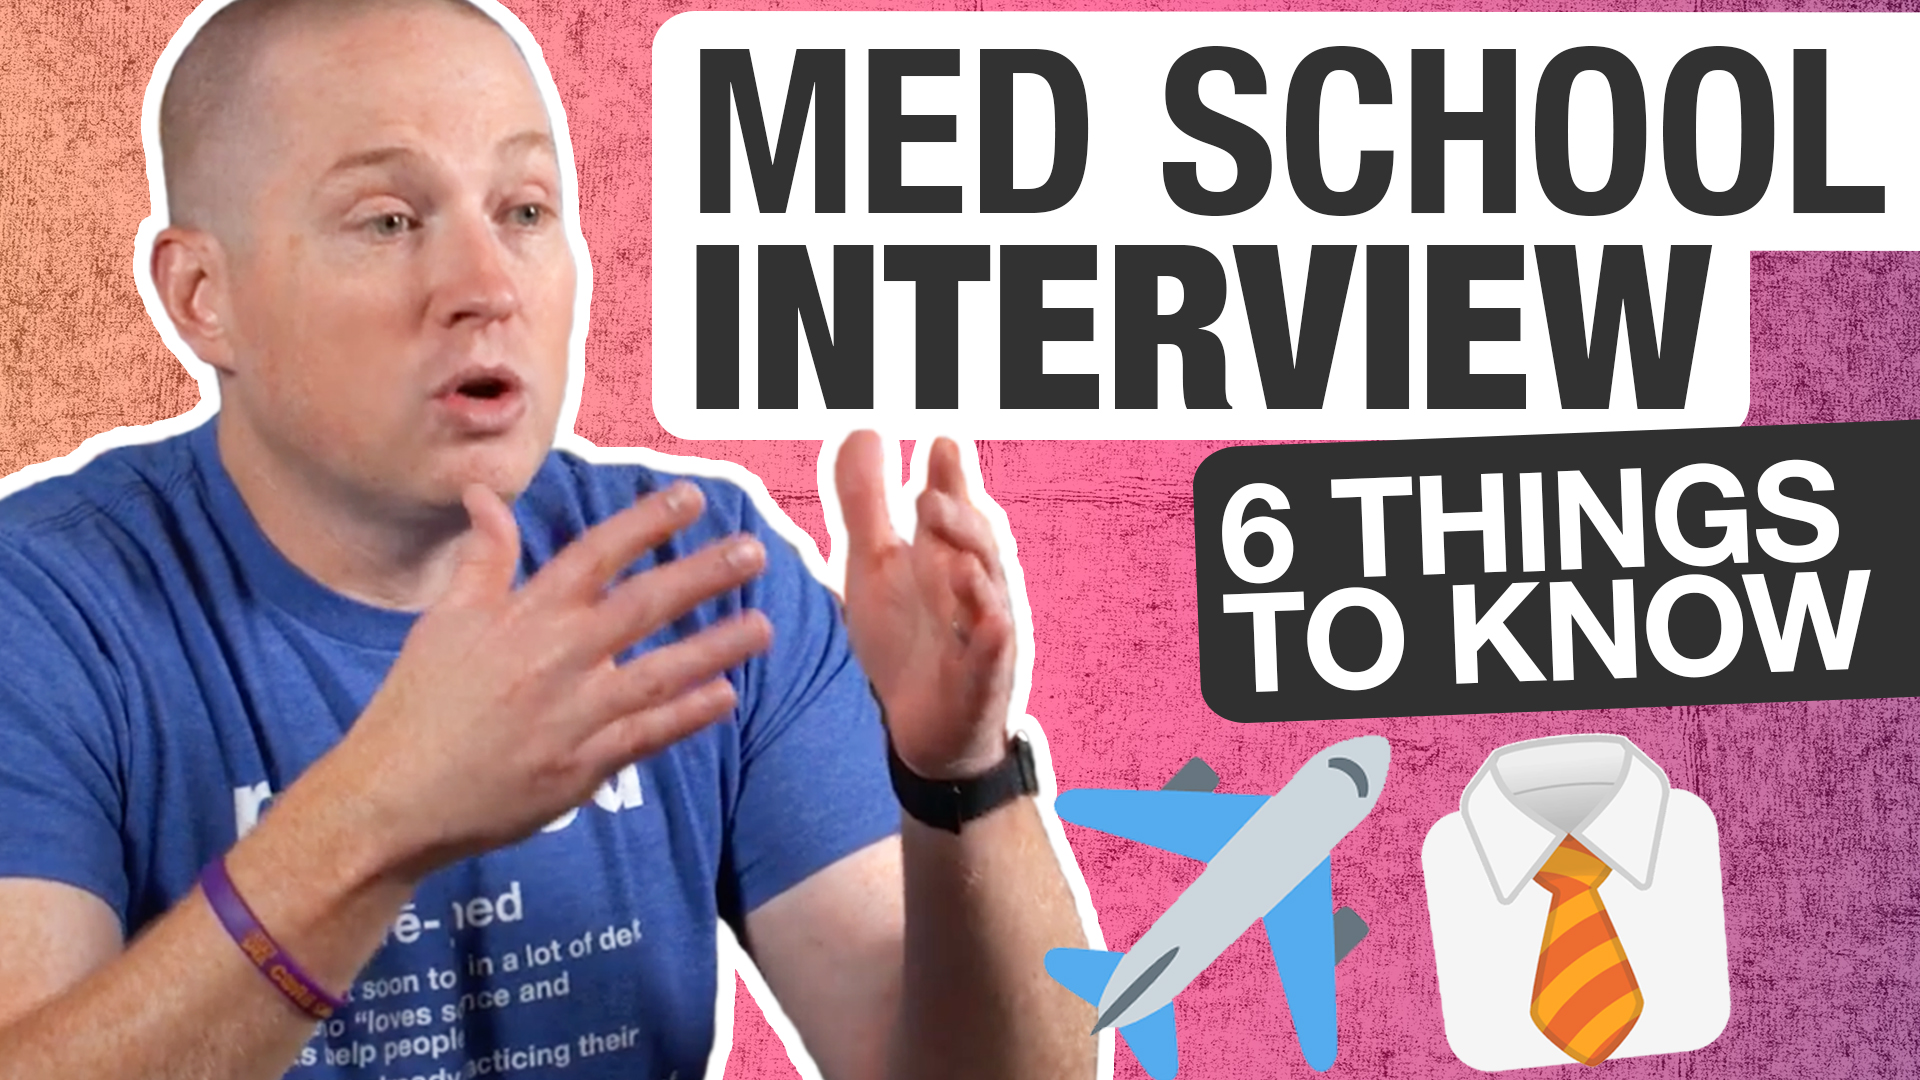 MSHQ Thumbnail - Jan 20, 2020 - 6 Things to Know BEFORE Your Med School Interview